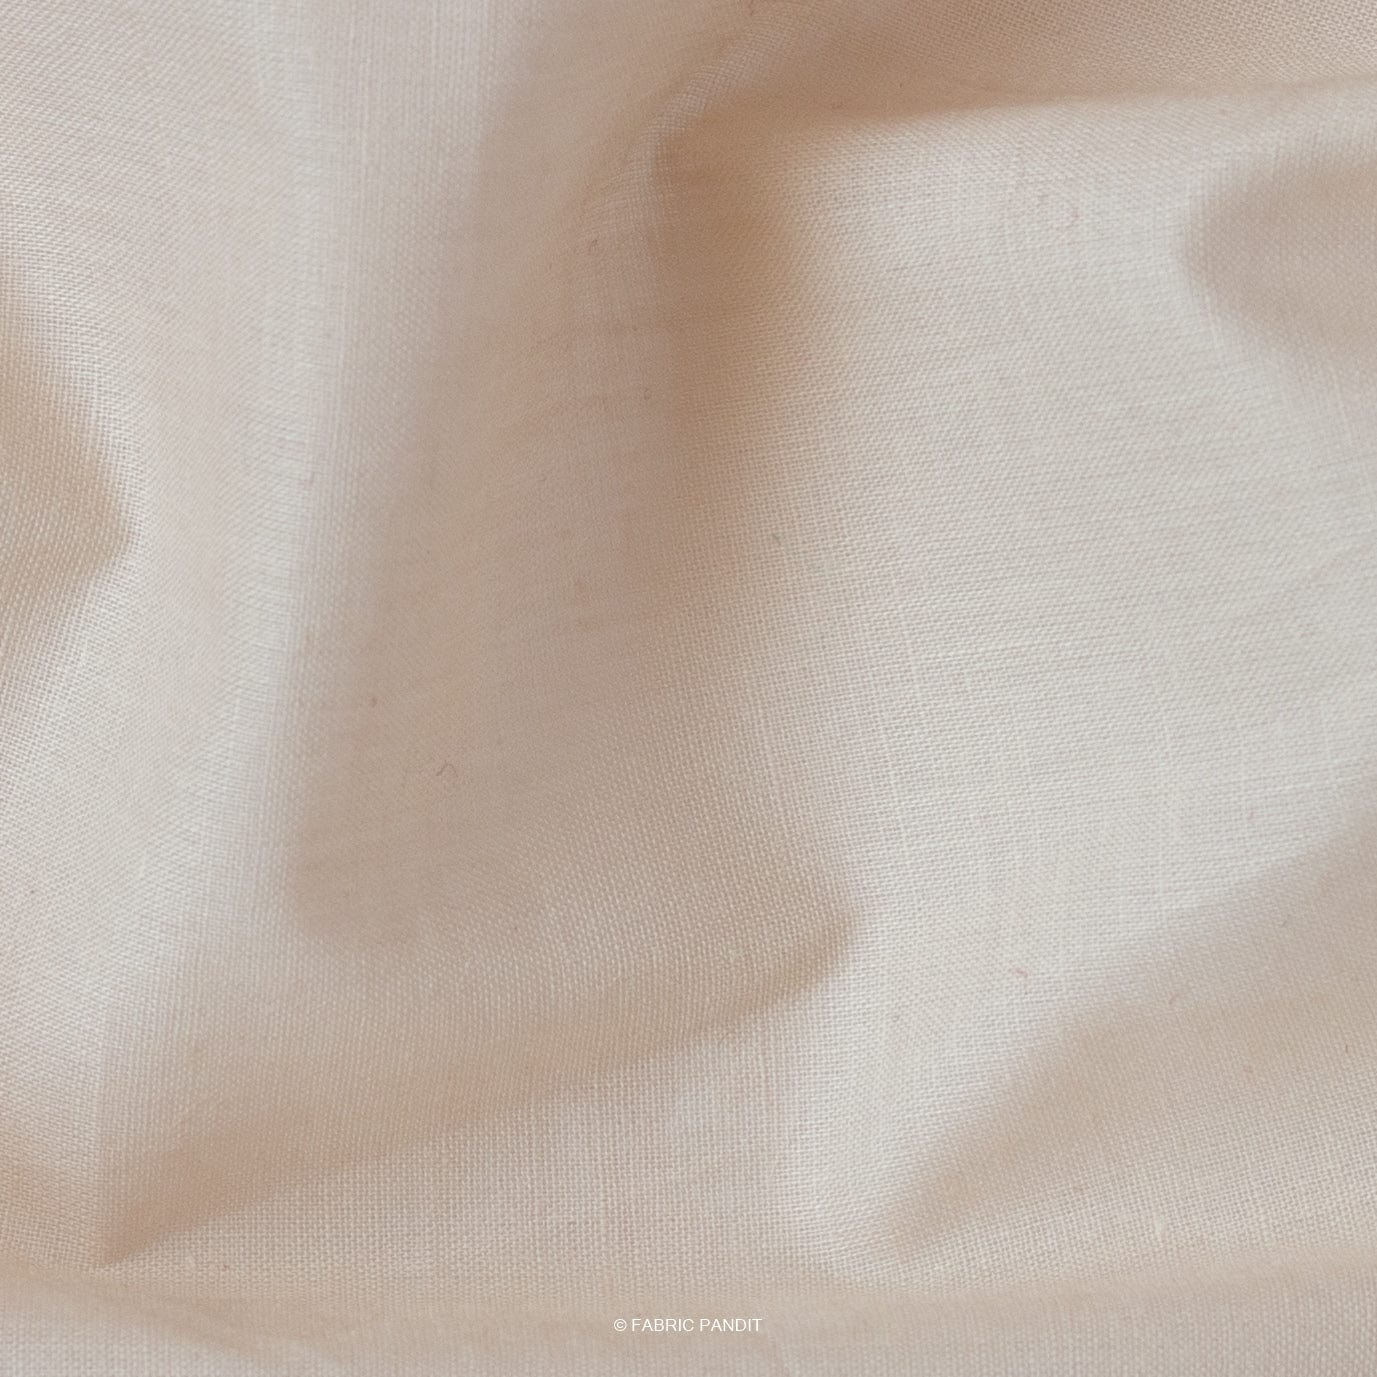 Fabric Pandit Cut Piece (CUT PIECE) Natural Beige Color Pure Cotton Cambric Fabric (Width 42 Inches)